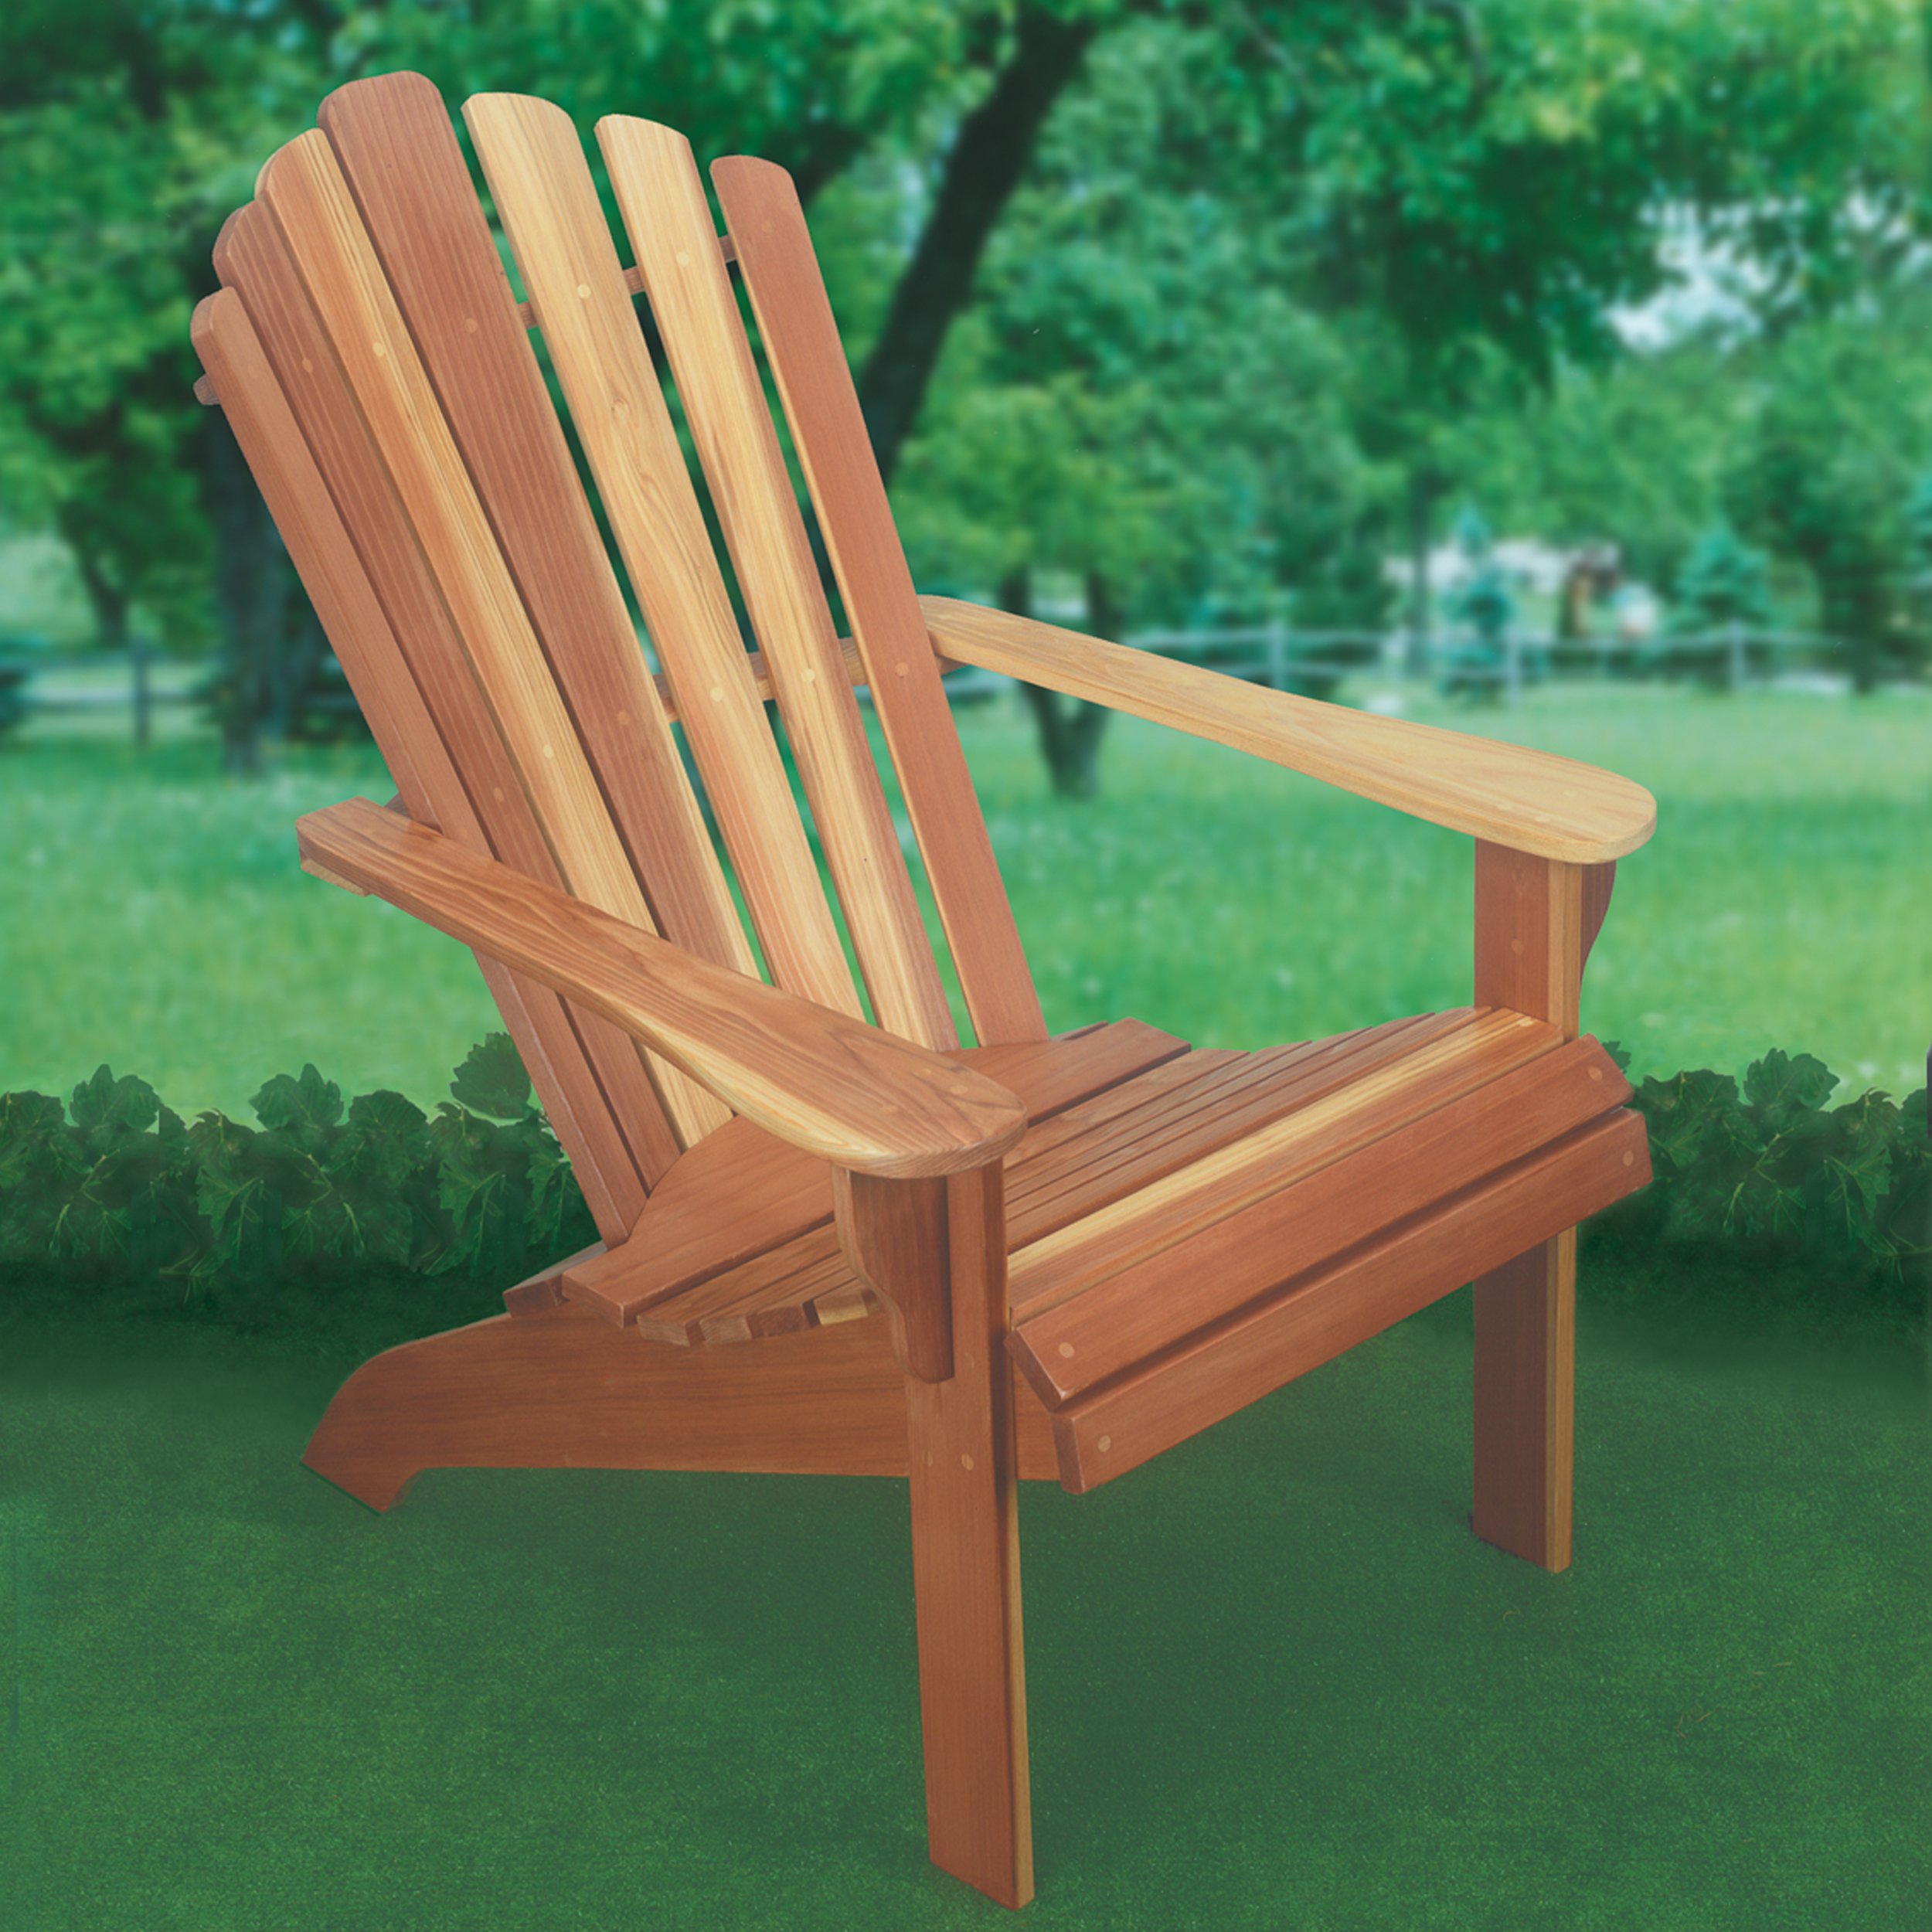 woodworking project paper plan to build adirondack chair